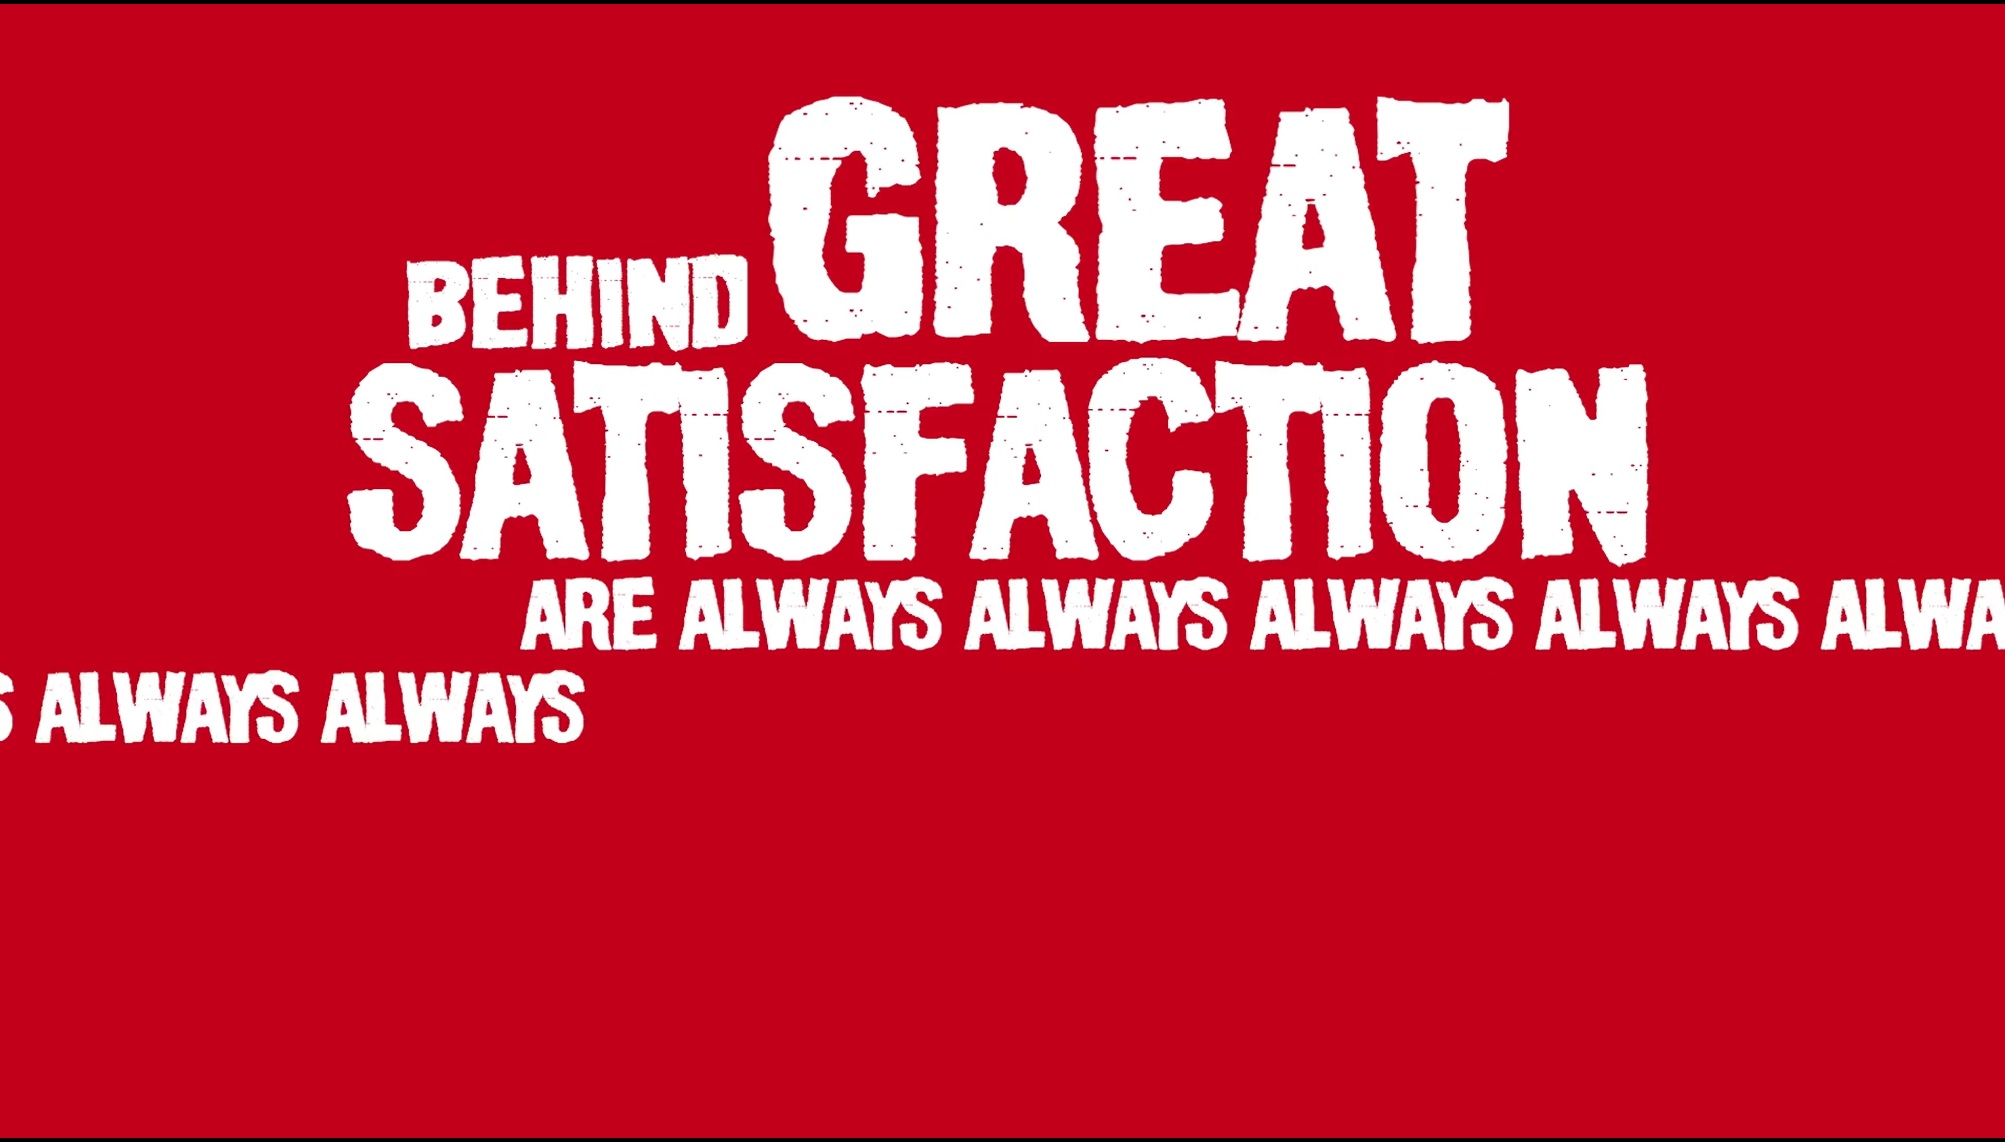 Behind great satisfaction, Faravelli's new ad campaign